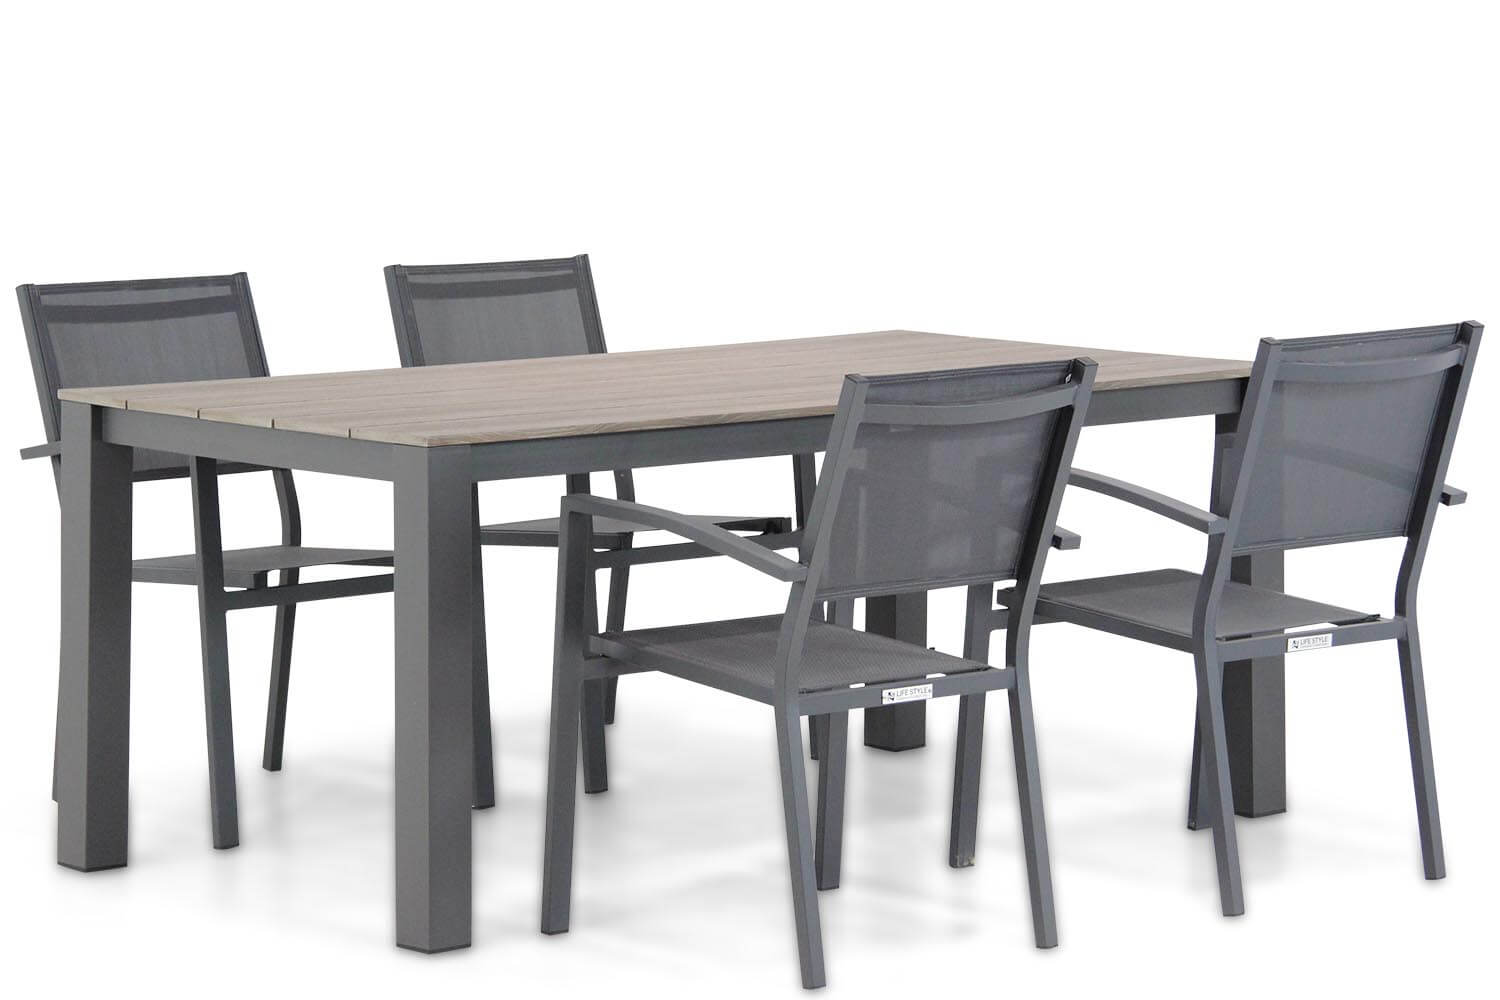 Lifestyle AmarillaValley 180 cm dining tuinset 5 delig